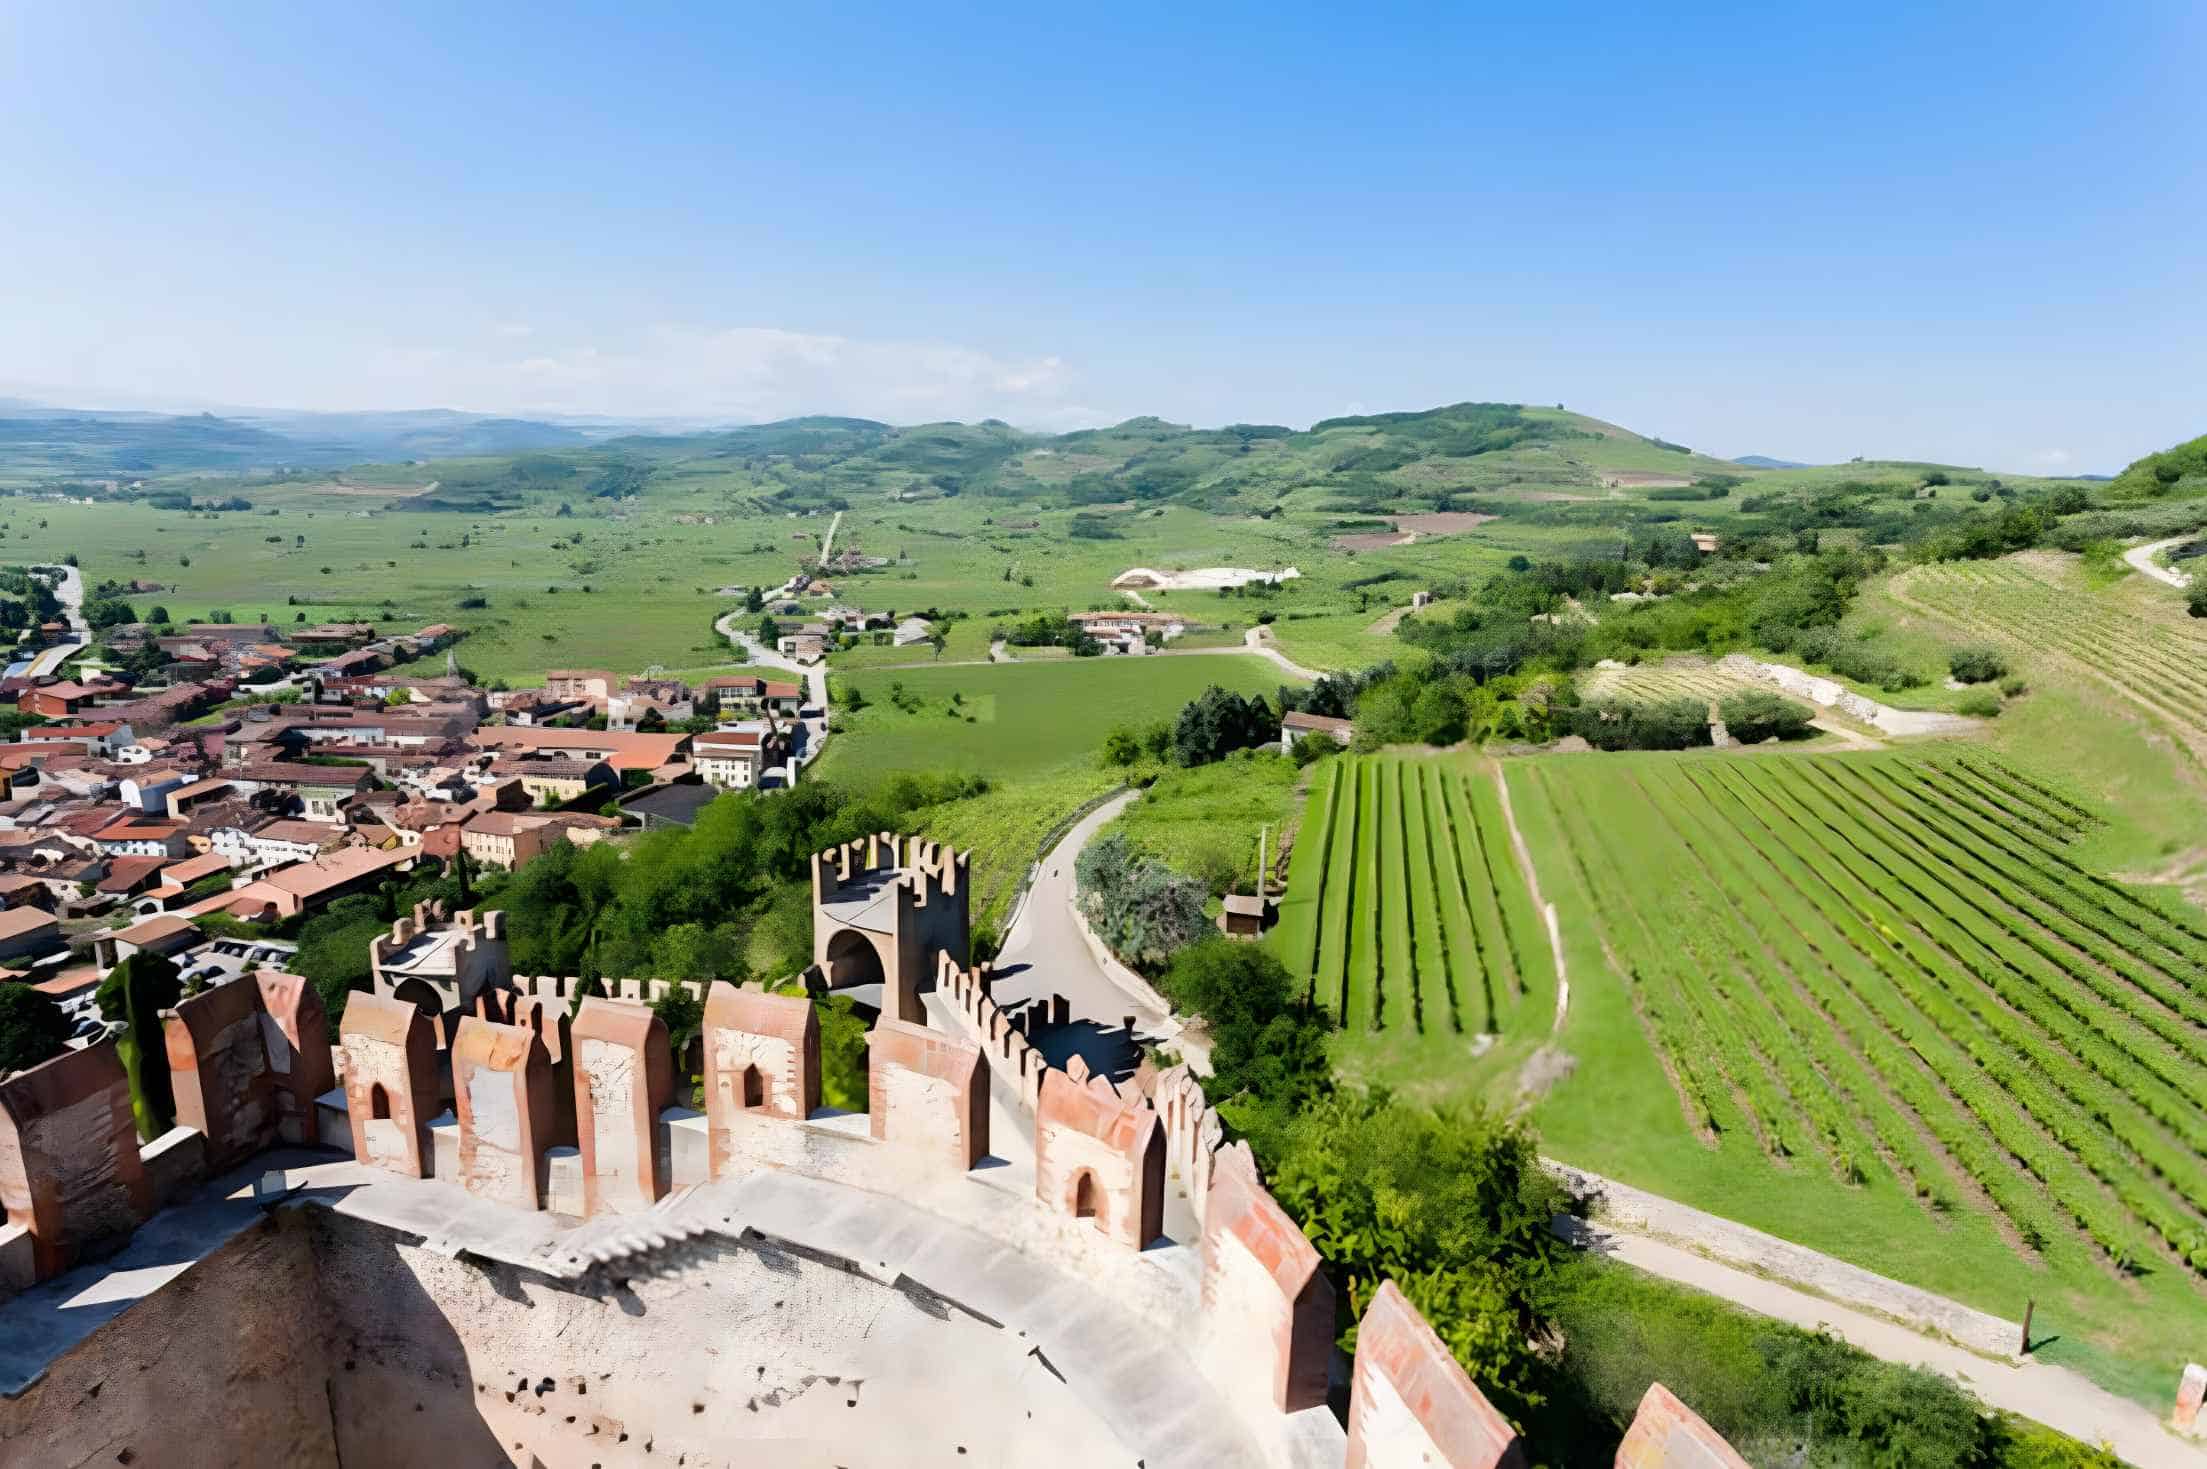 Brief History of the Soave Wine